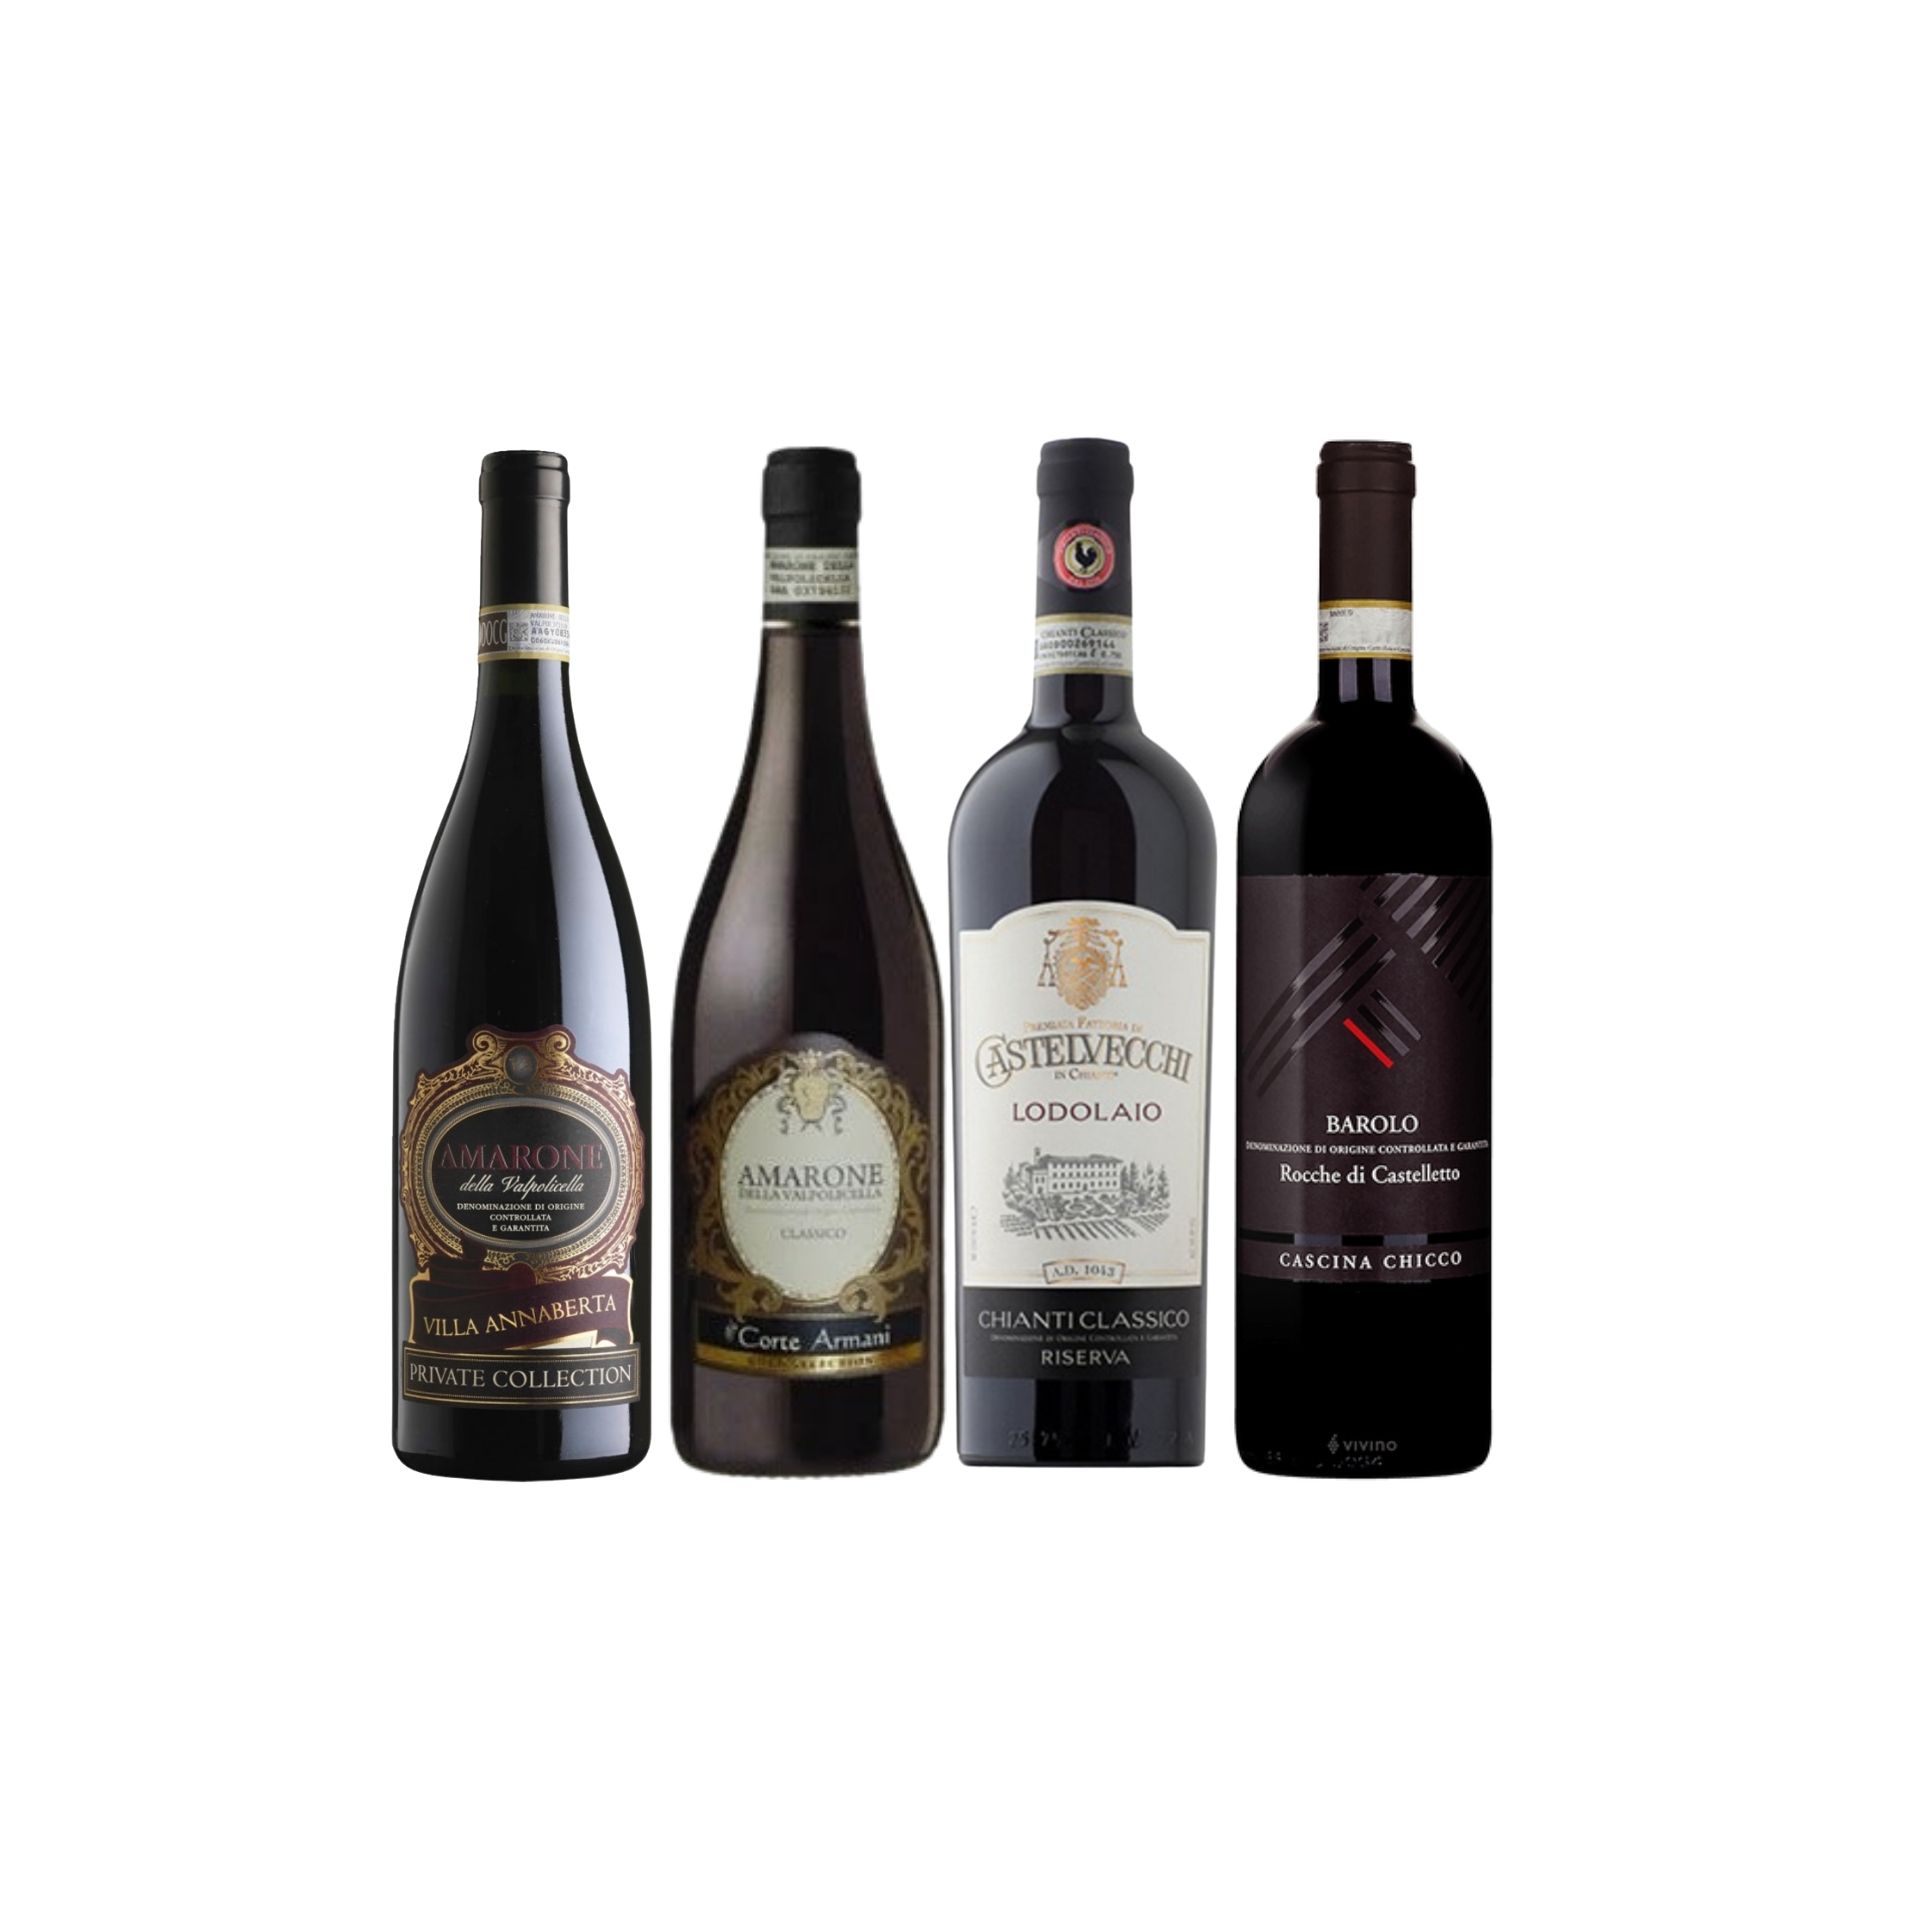 【Bundle B】 Enjoy 2 Bottles of Amarone Plus Chianti Riserva At Only $244 With A Free Set of 6 Schott Zwiesel Wine Glass worth $90 And Top-Up $68 for A Bottle of Barolo Worth $85